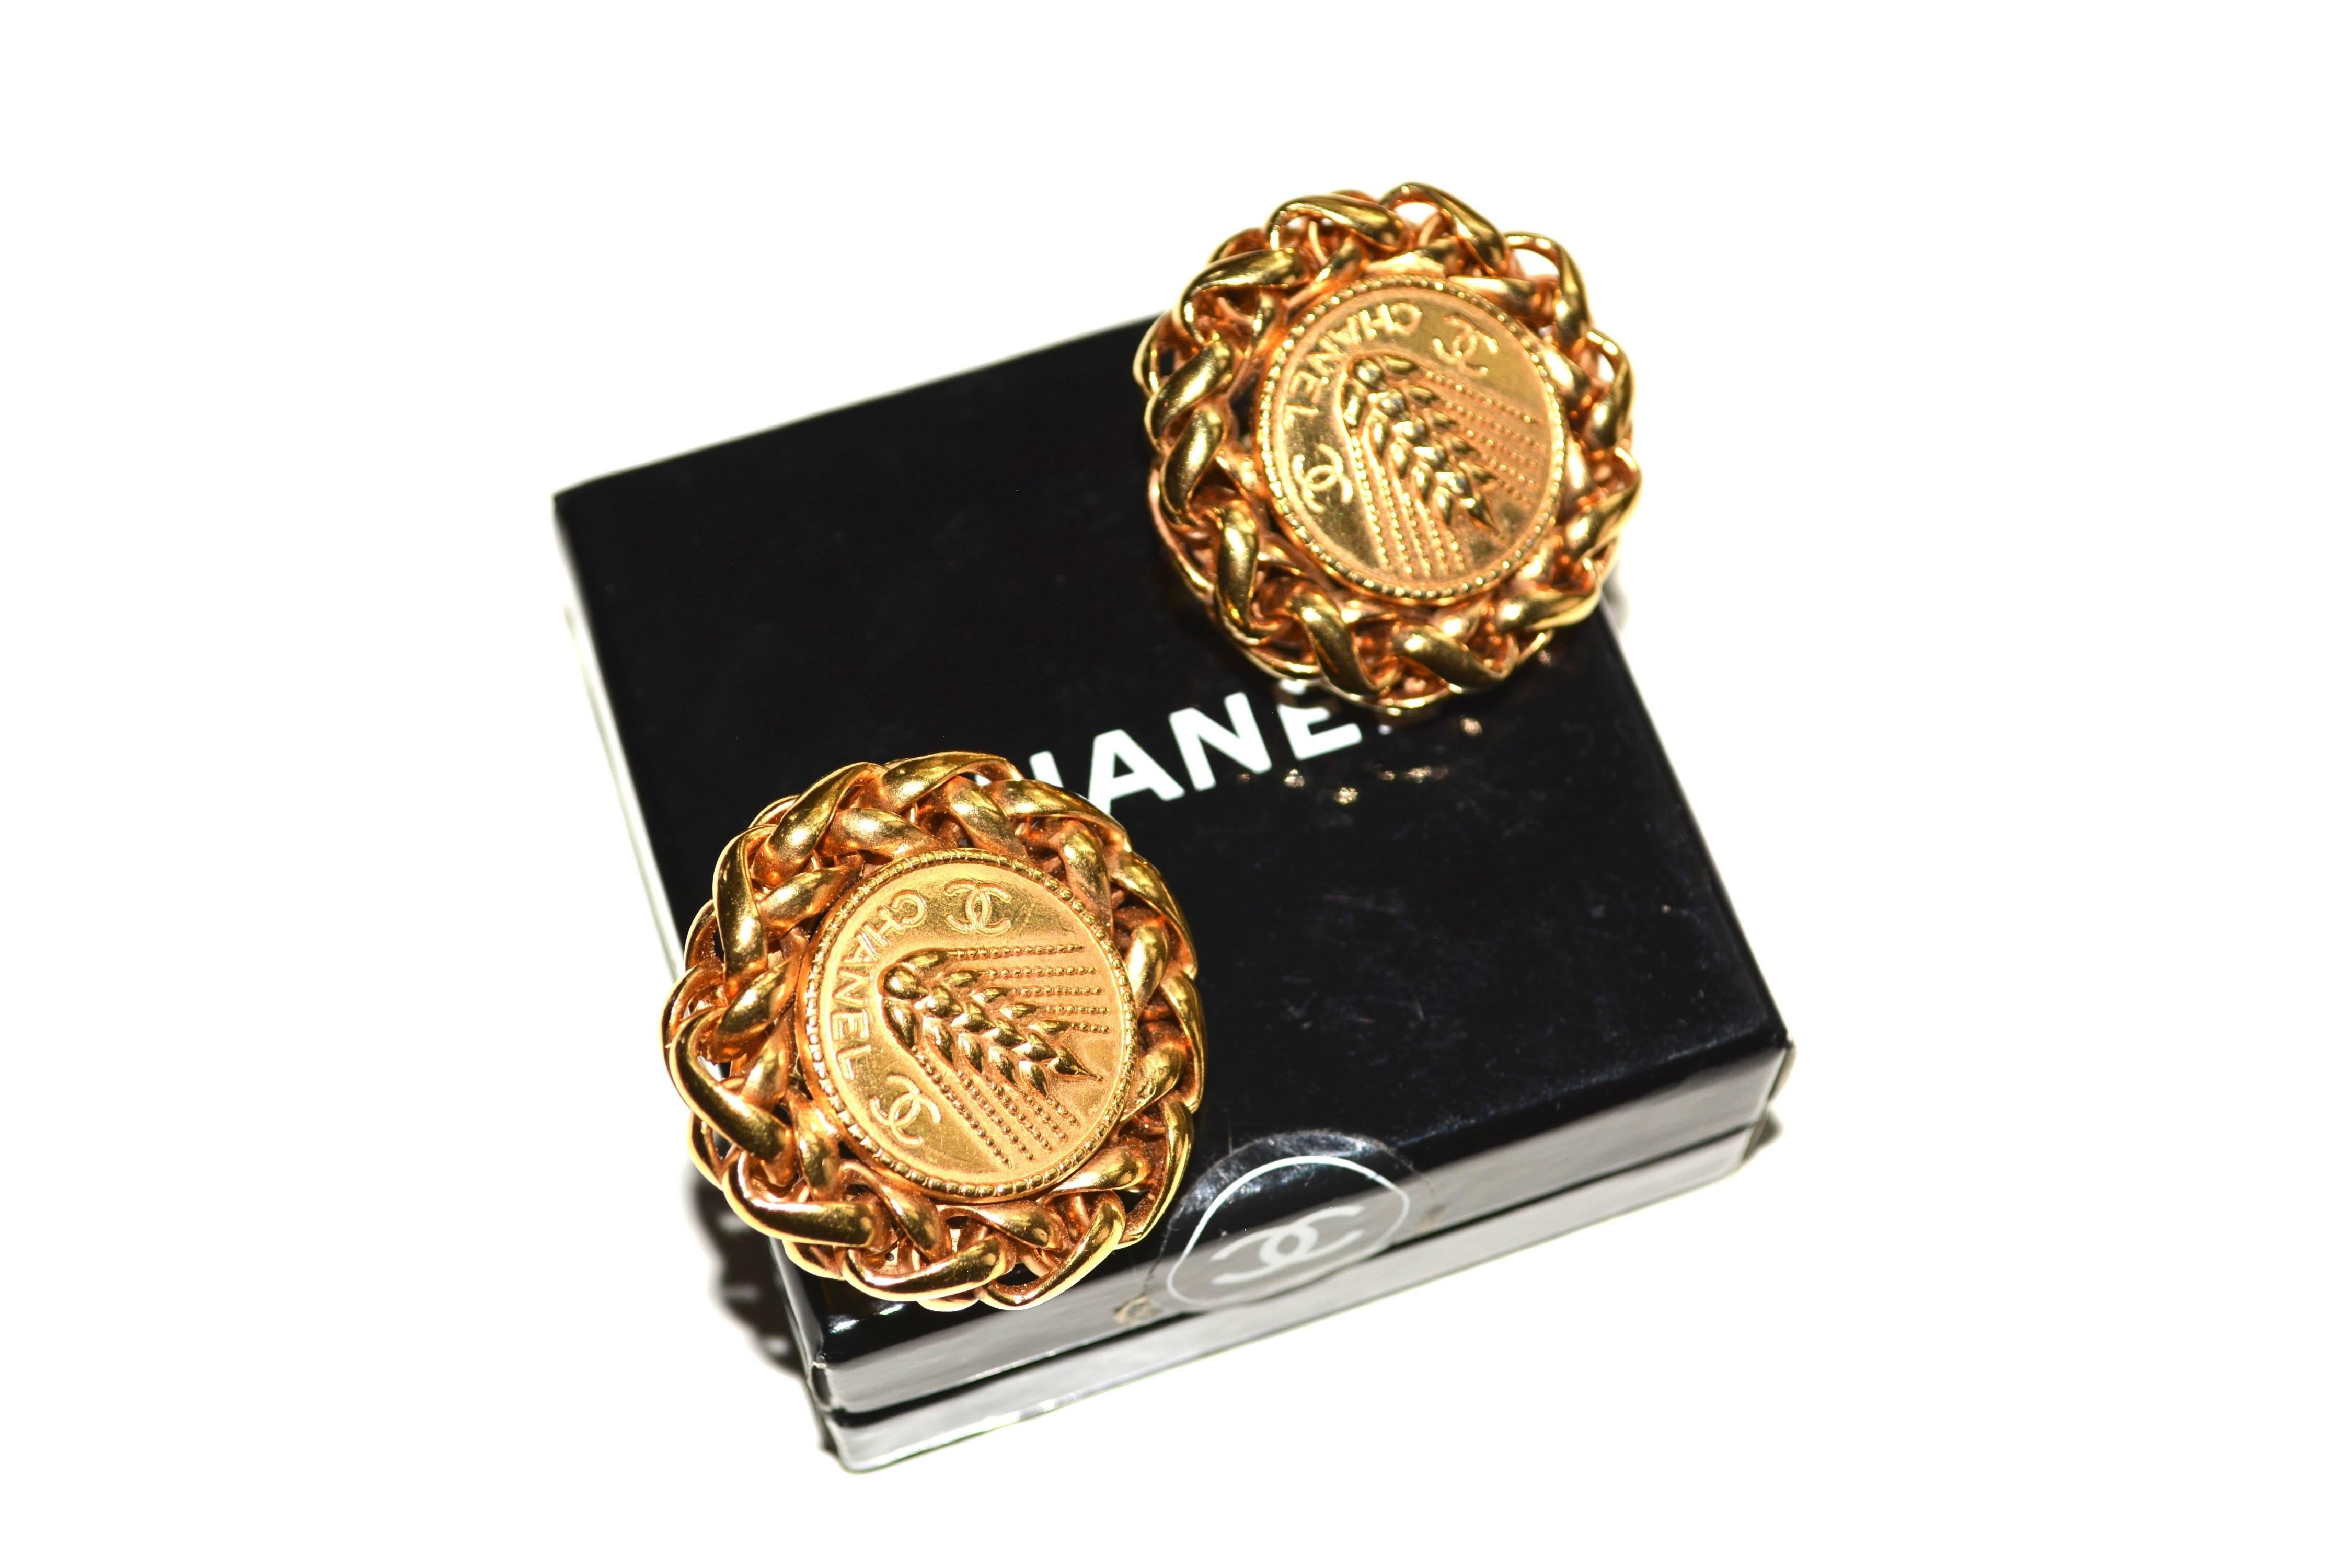 Lovely gilt larger wheat motif Chanel earrings. Signed with the simple Chanel signature dating these to most likely the 70s, this signature style was supposed to have been replaced by 1971.  However, it is possible it could be slightly later.  The